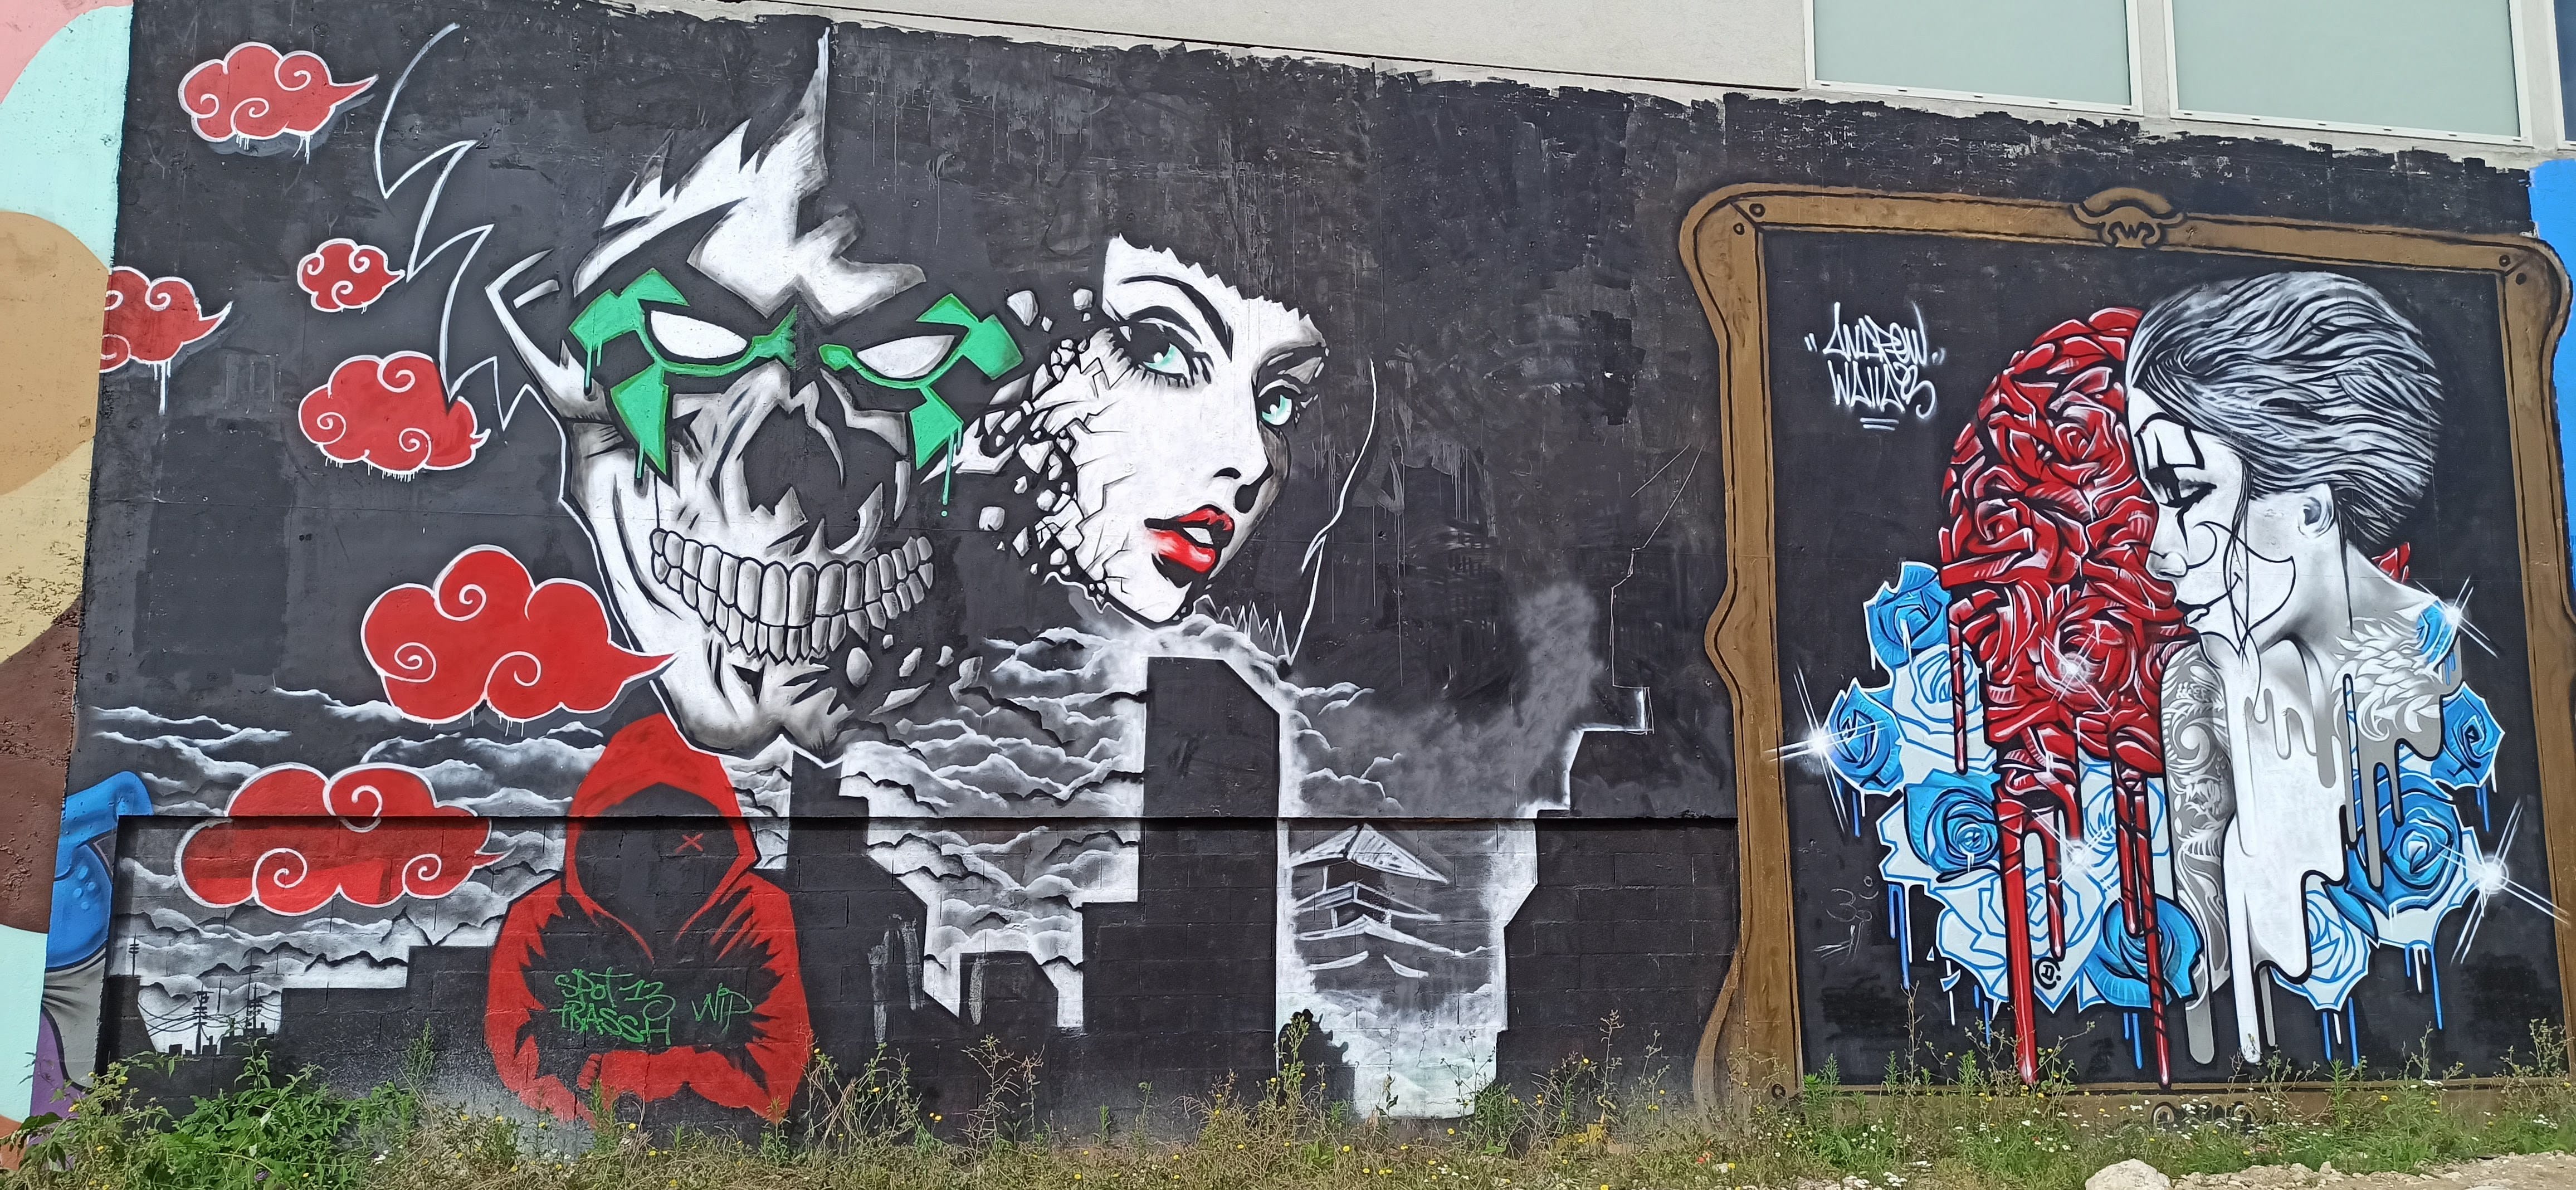 Graffiti 5502  captured by Rabot in Paris France